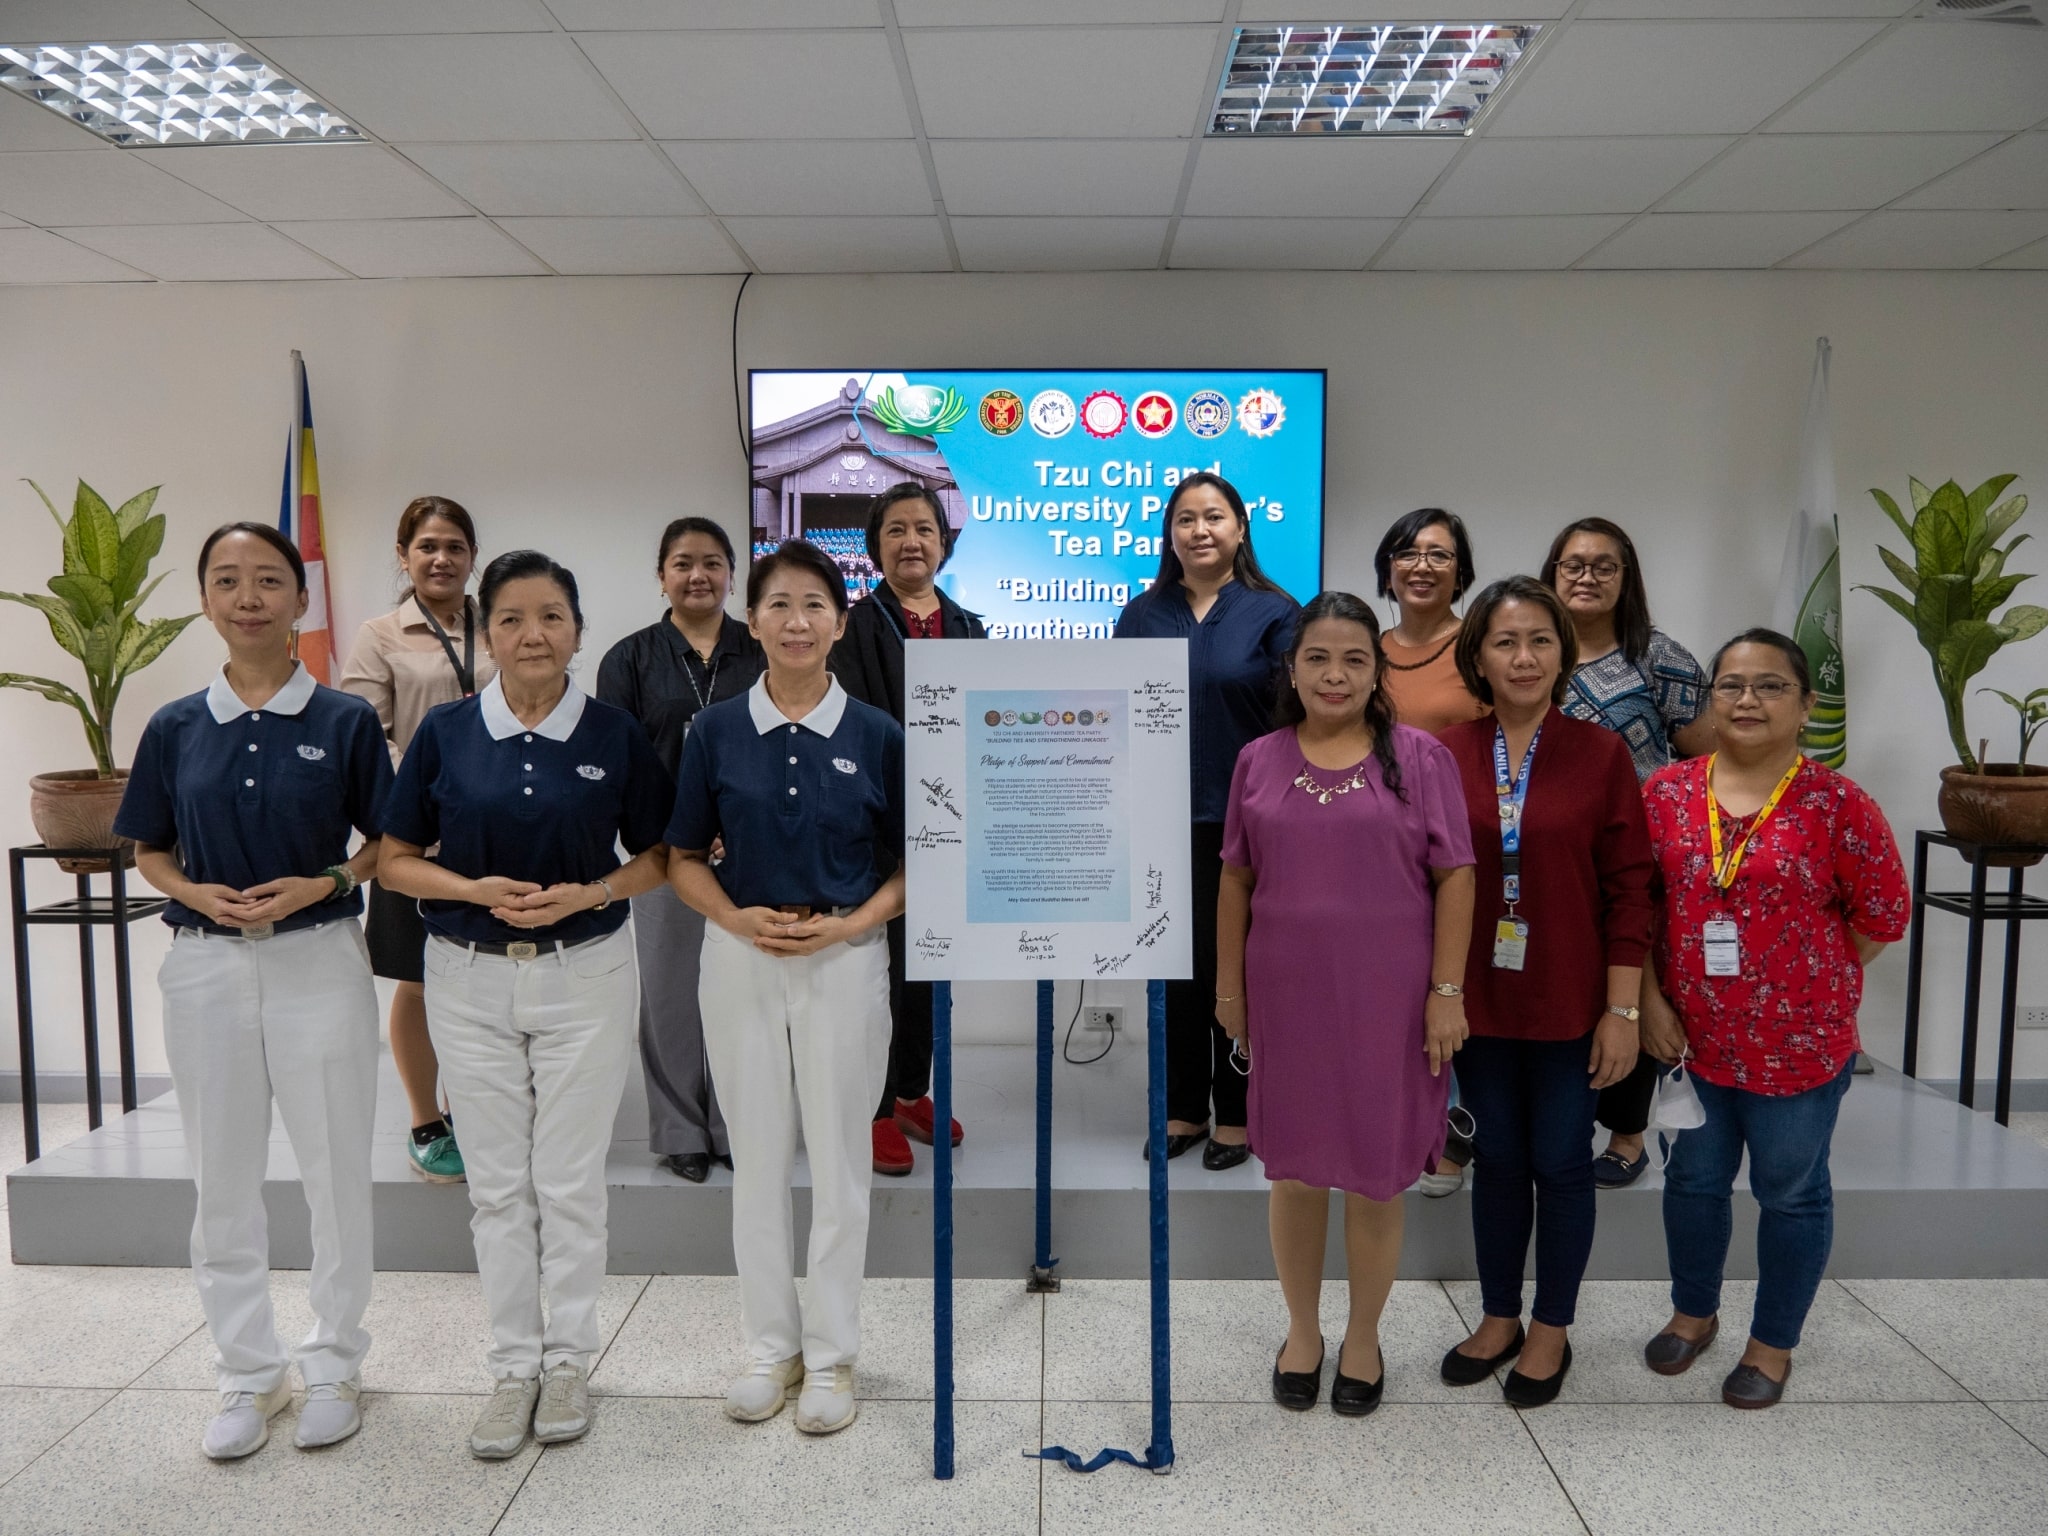 University partners of Tzu Chi Philippines signs pledge of support to the foundation’s educational assistance program in a tea party held on November 17 at the Buddhist Tzu Chi Campus (BTCC) in Sta. Mesa, Manila.